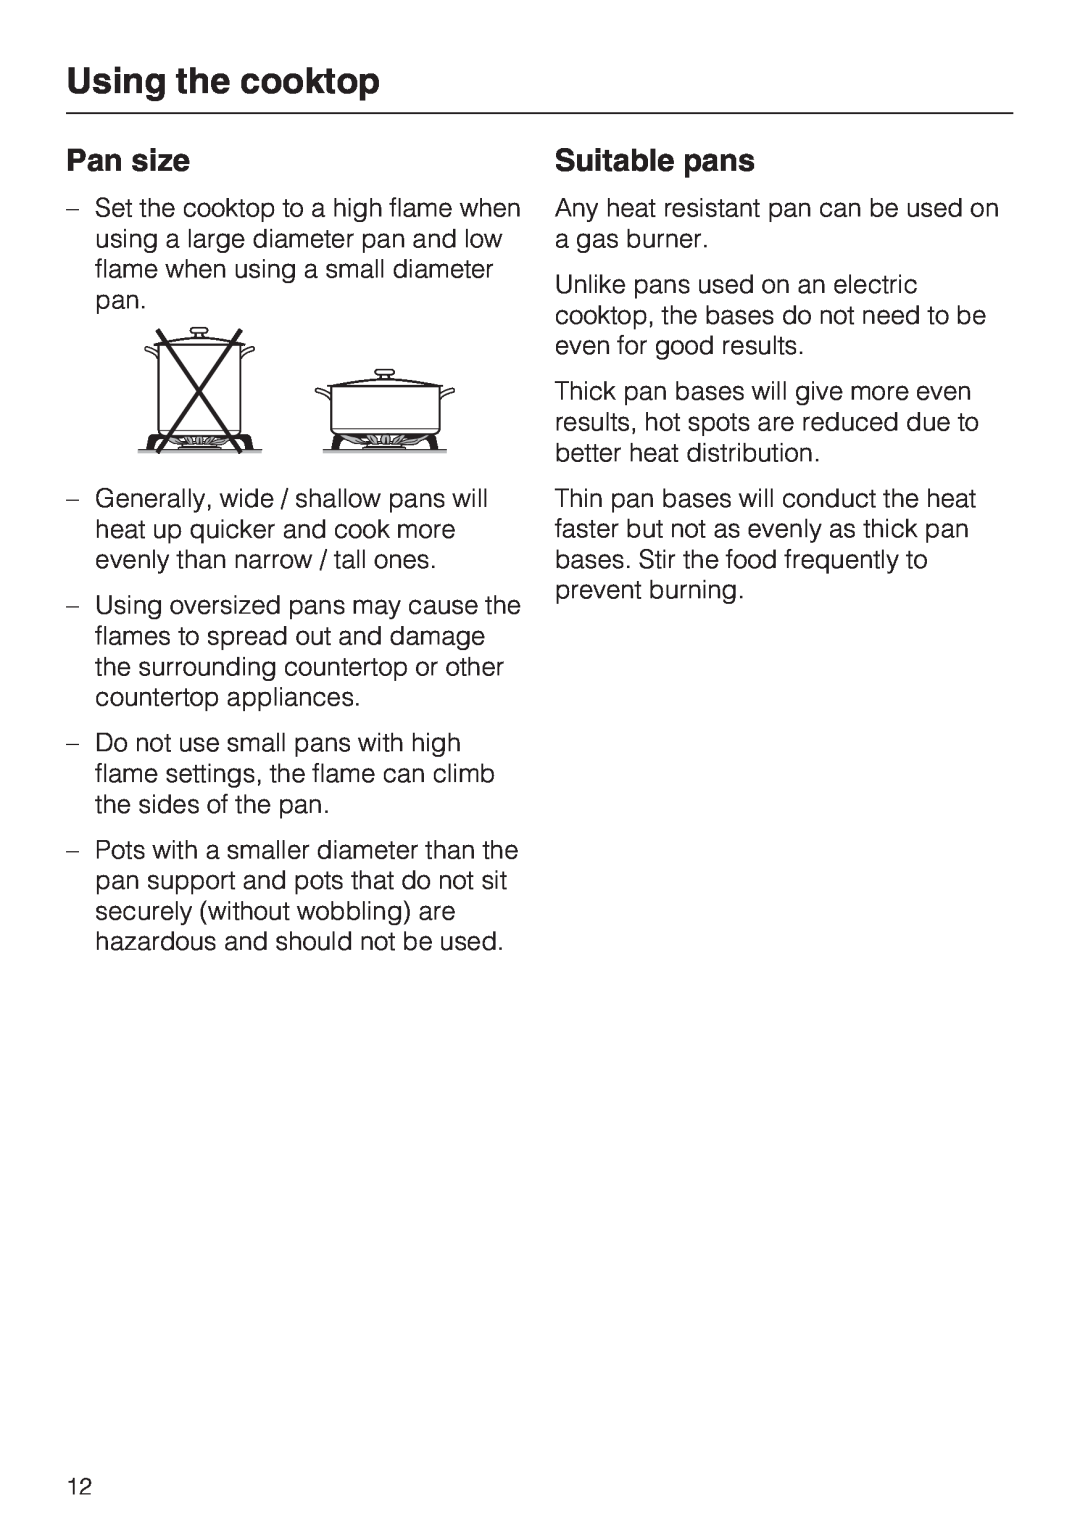 Miele KM 360 operating instructions Pan size, Suitable pans, Using the cooktop 